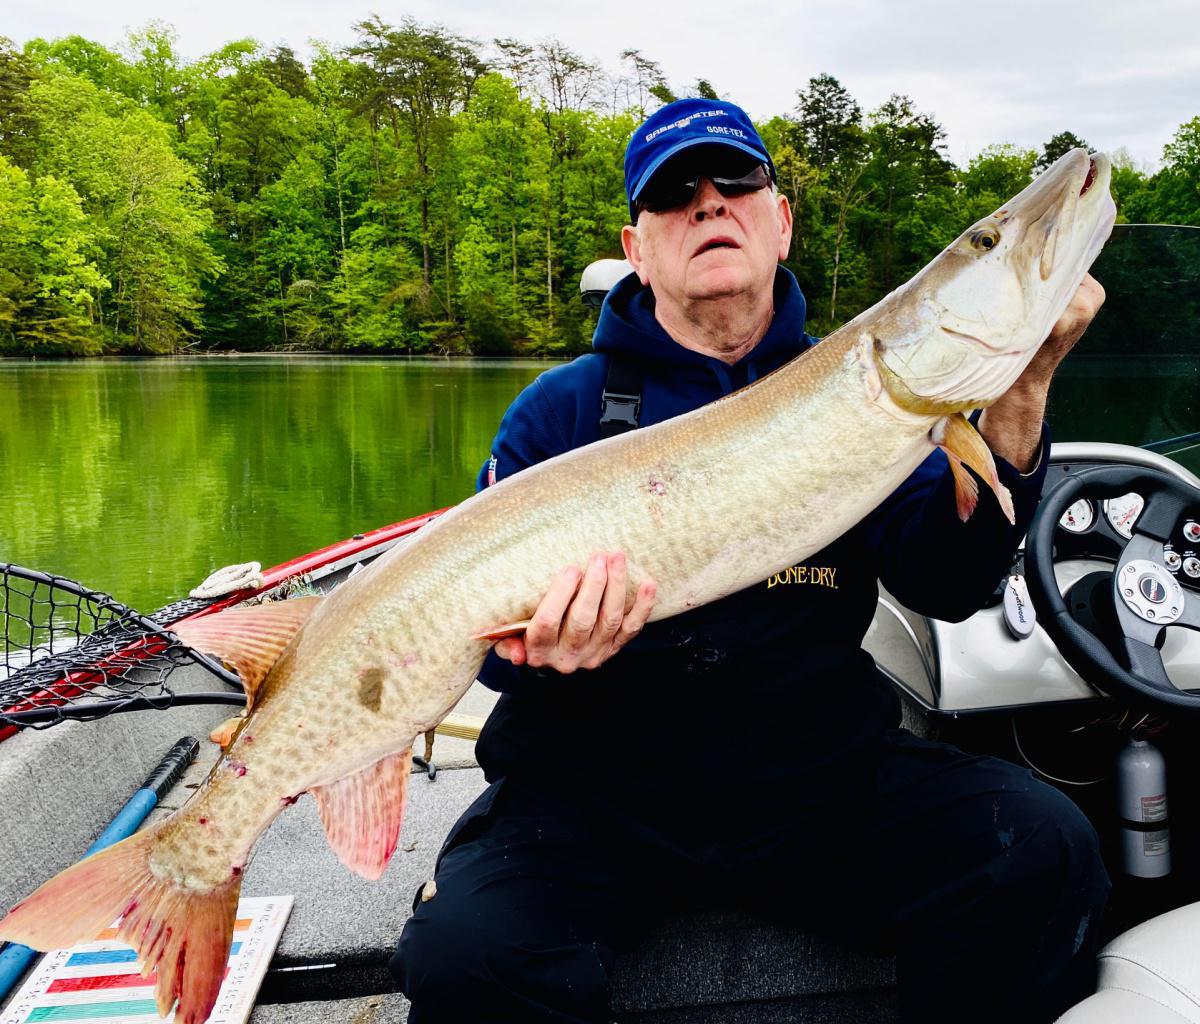 3 Sure-Fire Spots for Big Muskies